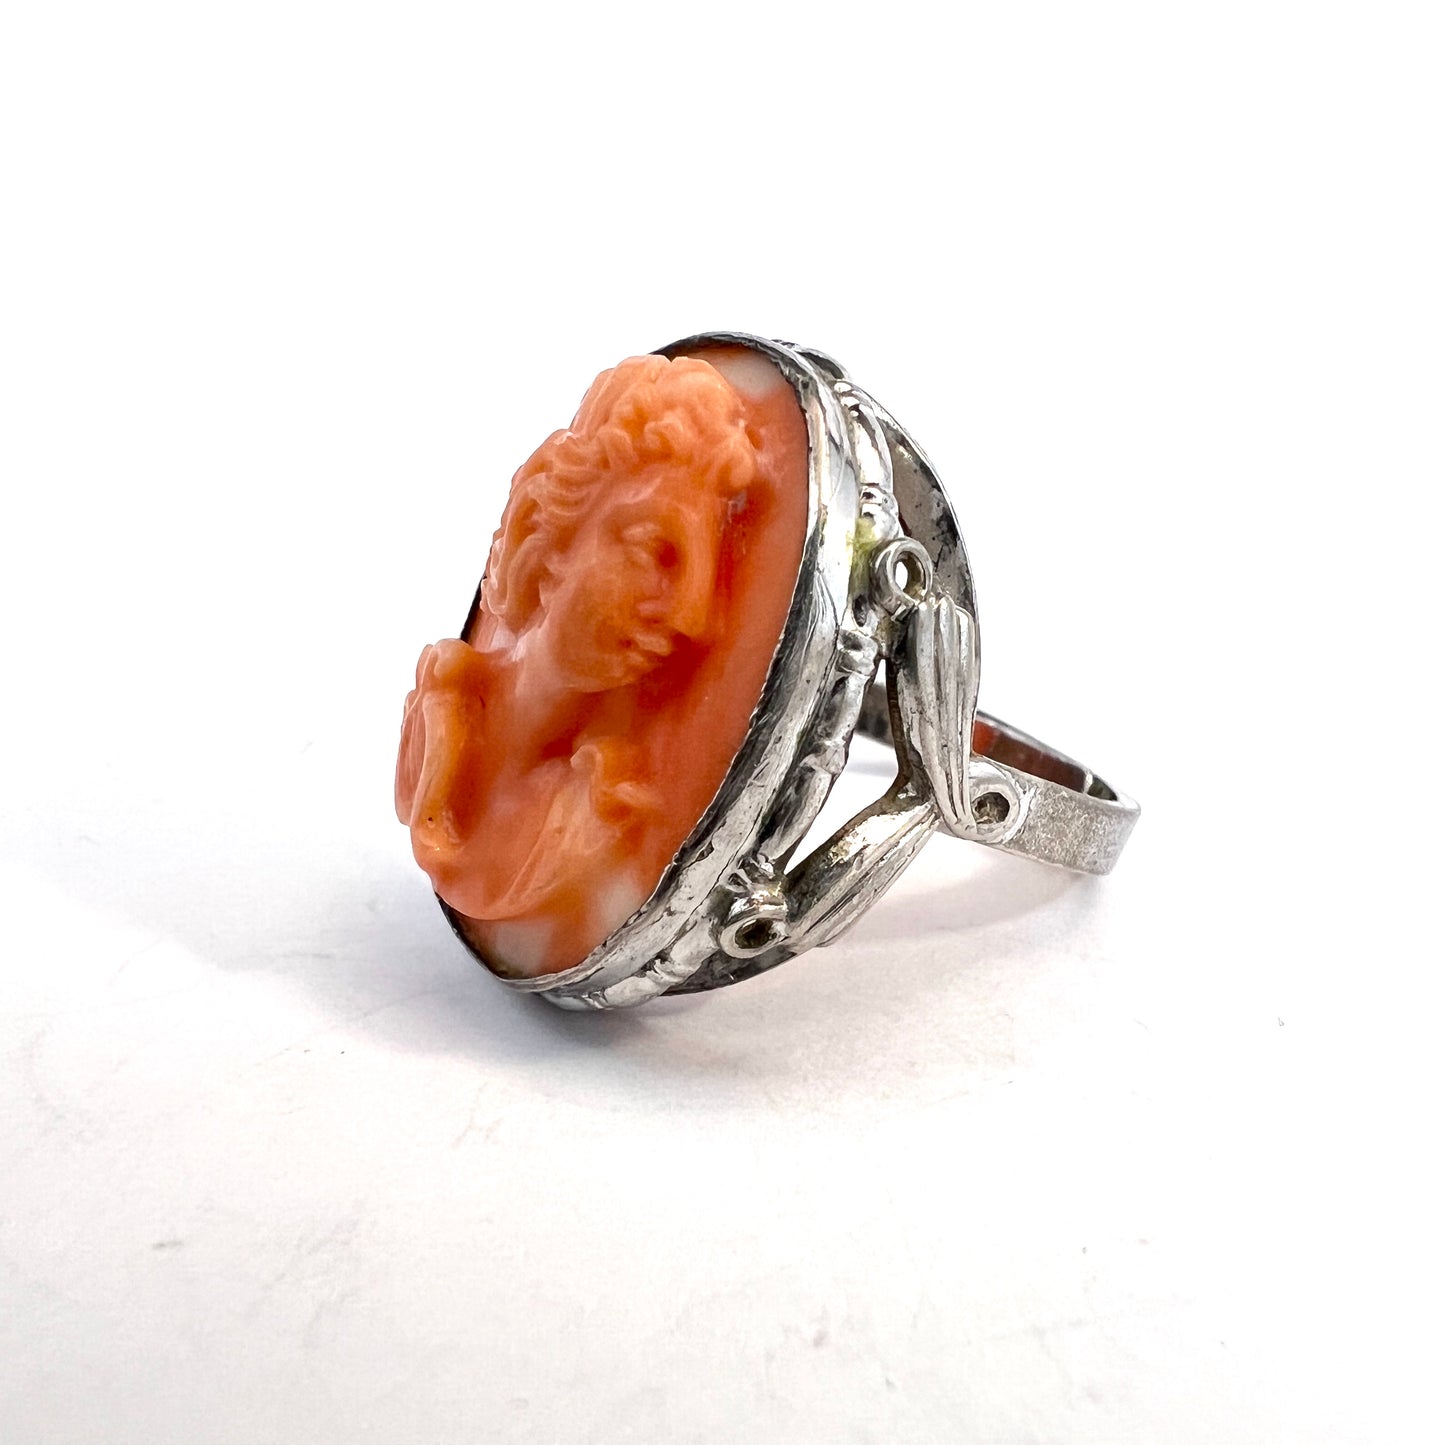 Ostby & Barton, USA c 1940s. Sterling Silver Coral Cameo Ring.